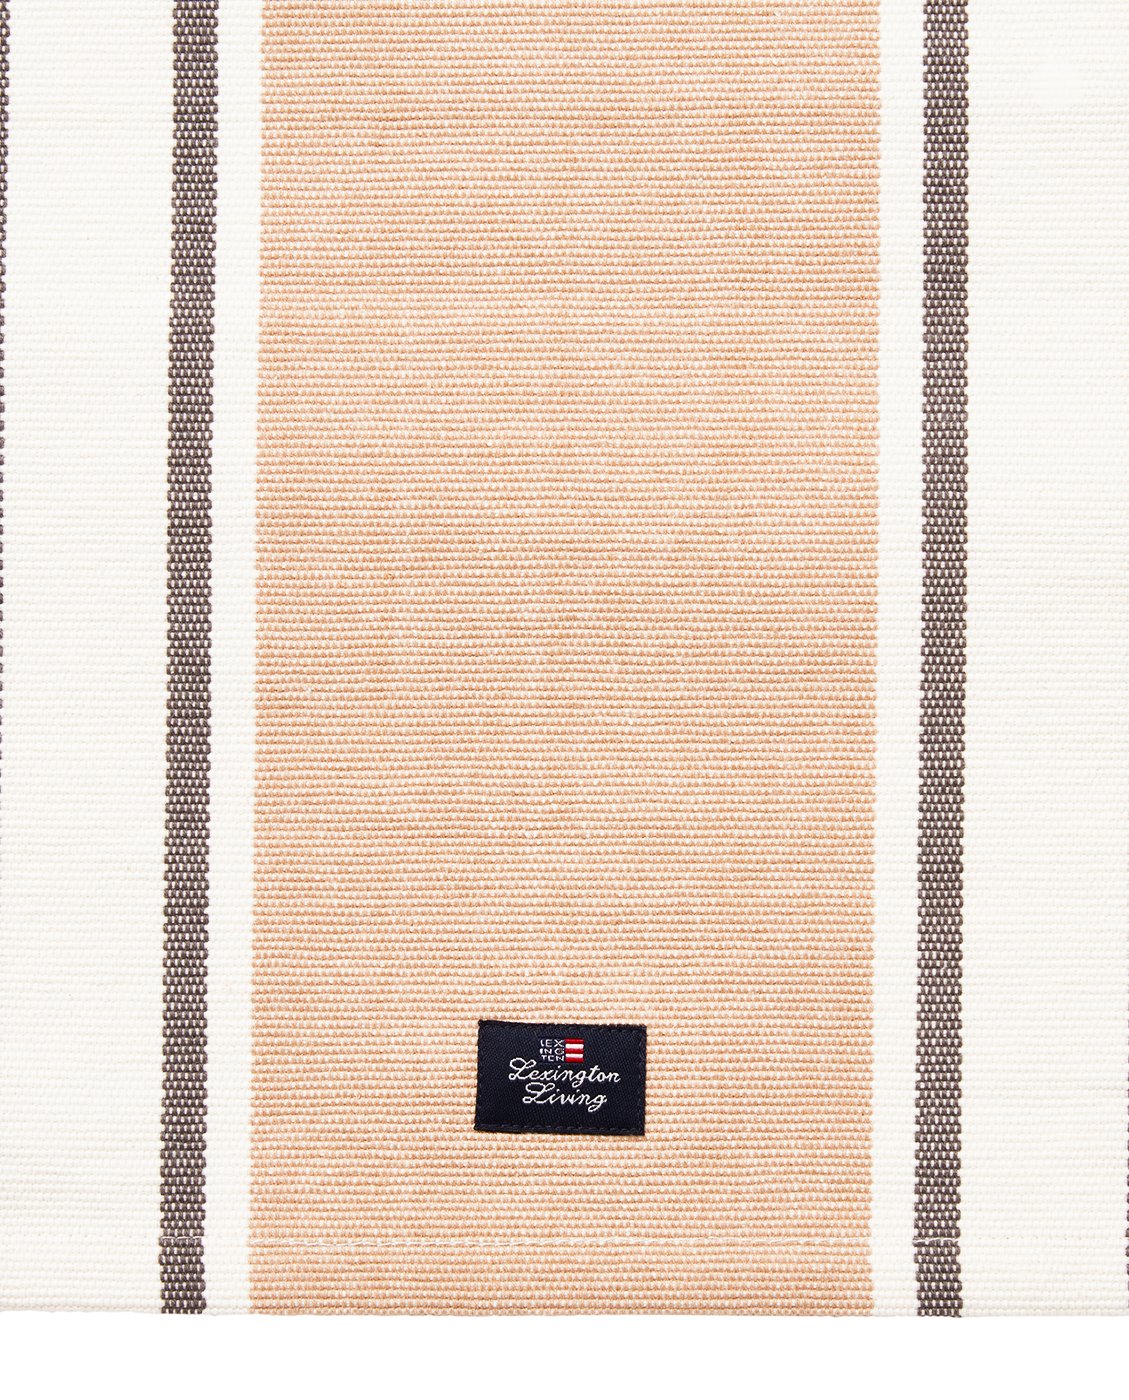 Striped Placemat 40x50 beige/white